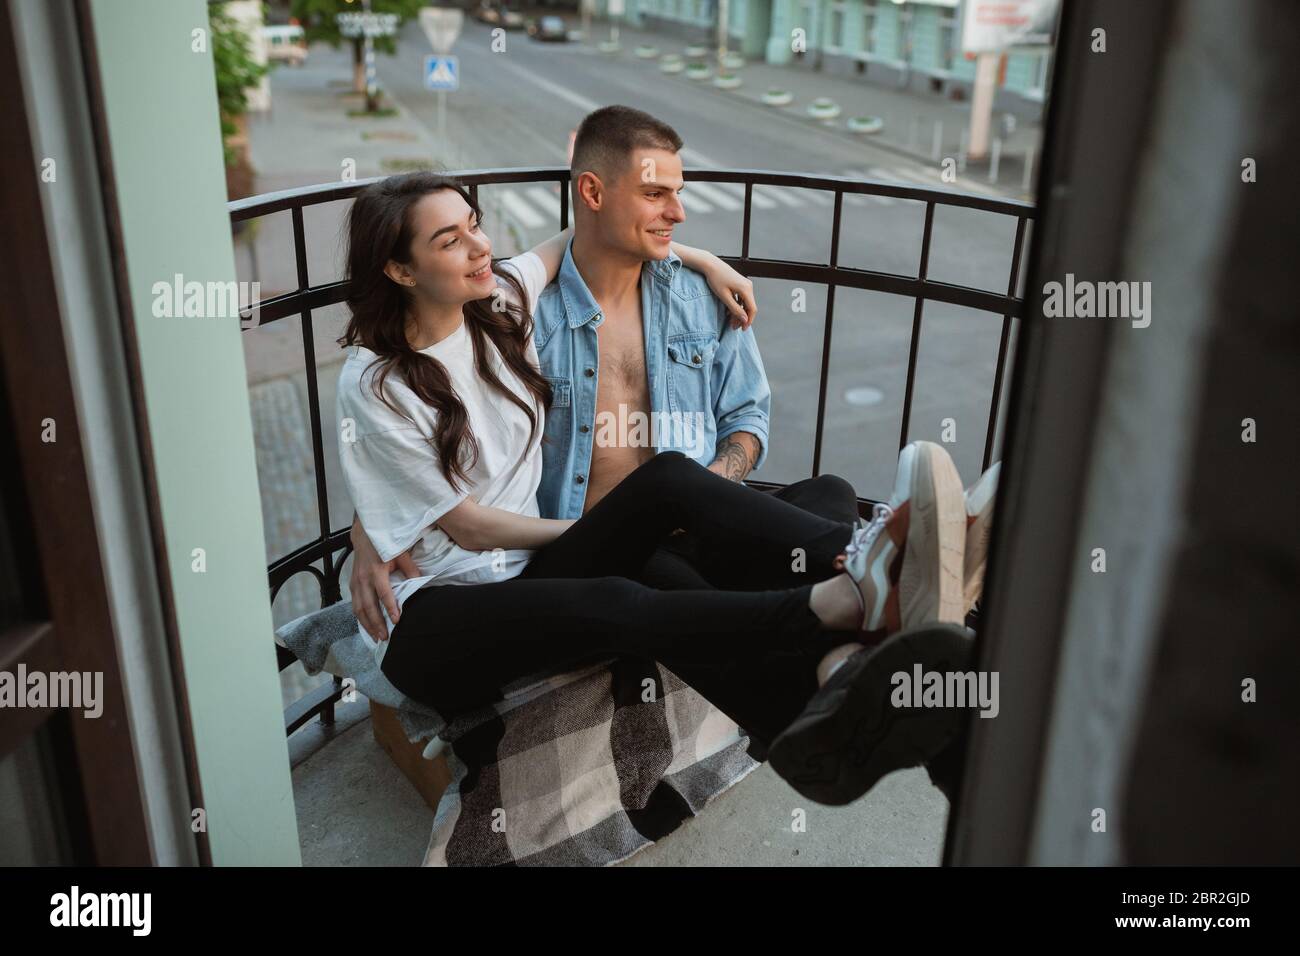 Sitting on the balcony, laughting. Quarantine lockdown, stay home concept - young beautiful caucasian couple enjoying new lifestyle during coronavirus. Happiness, togetherness, healthcare. Stock Photo